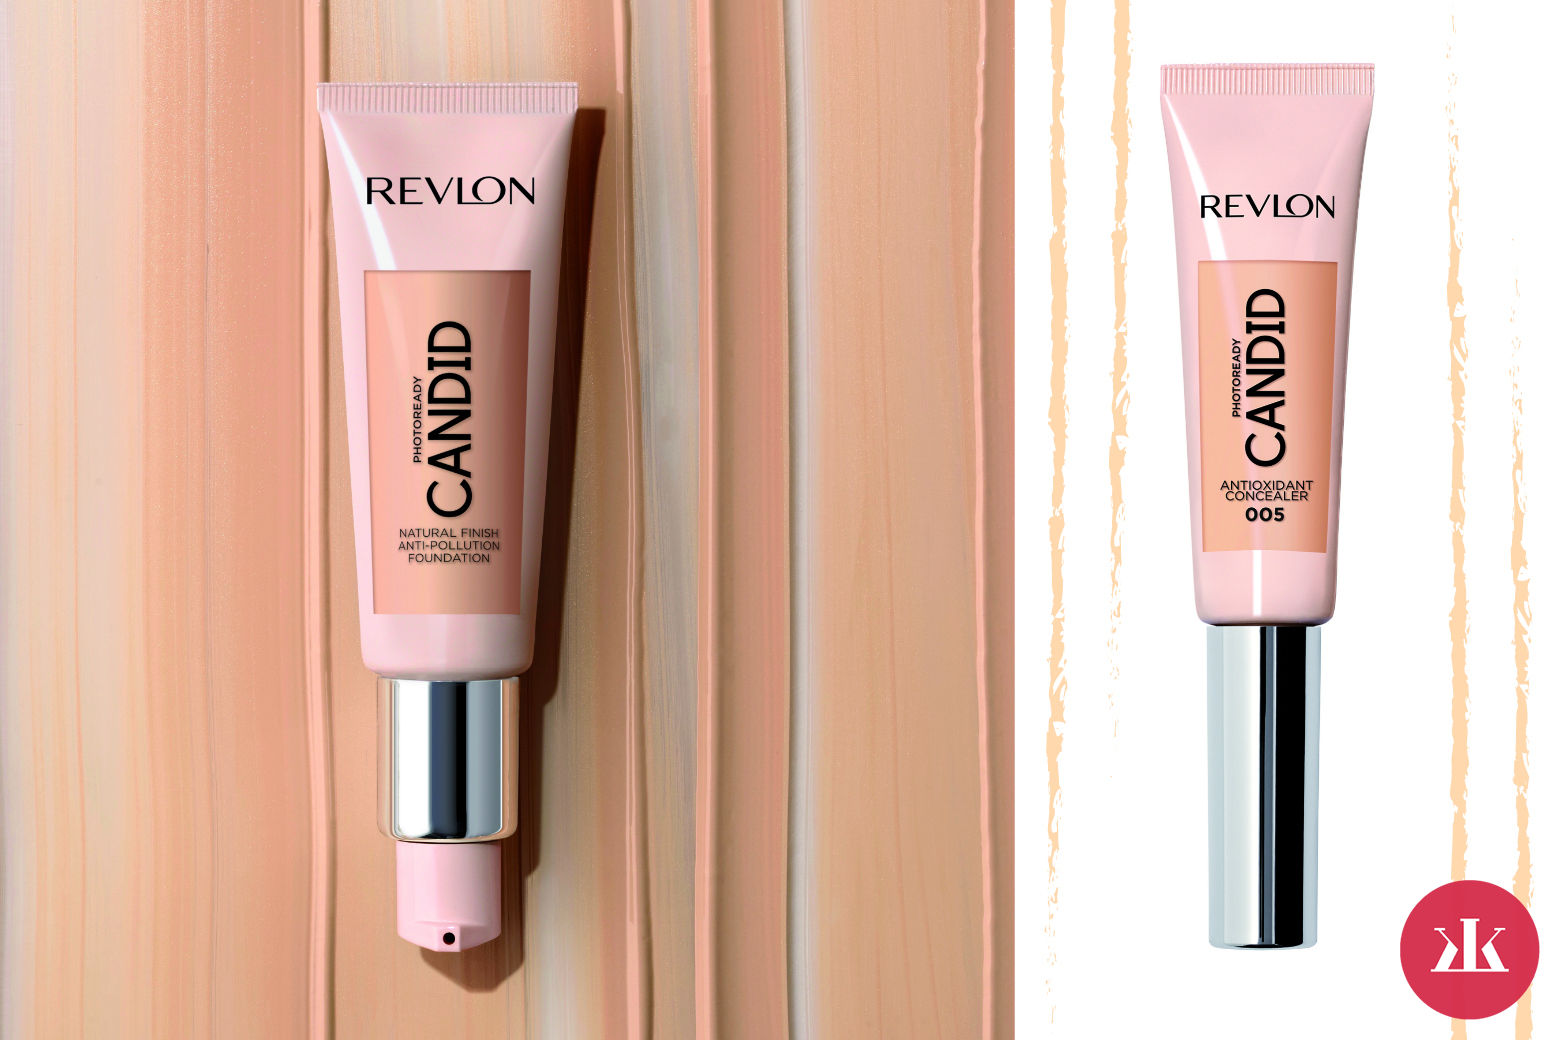 Natural Finish Anti-Pollution Foundation a Revlon PhotoReady Candid™Antioxidant Concealer